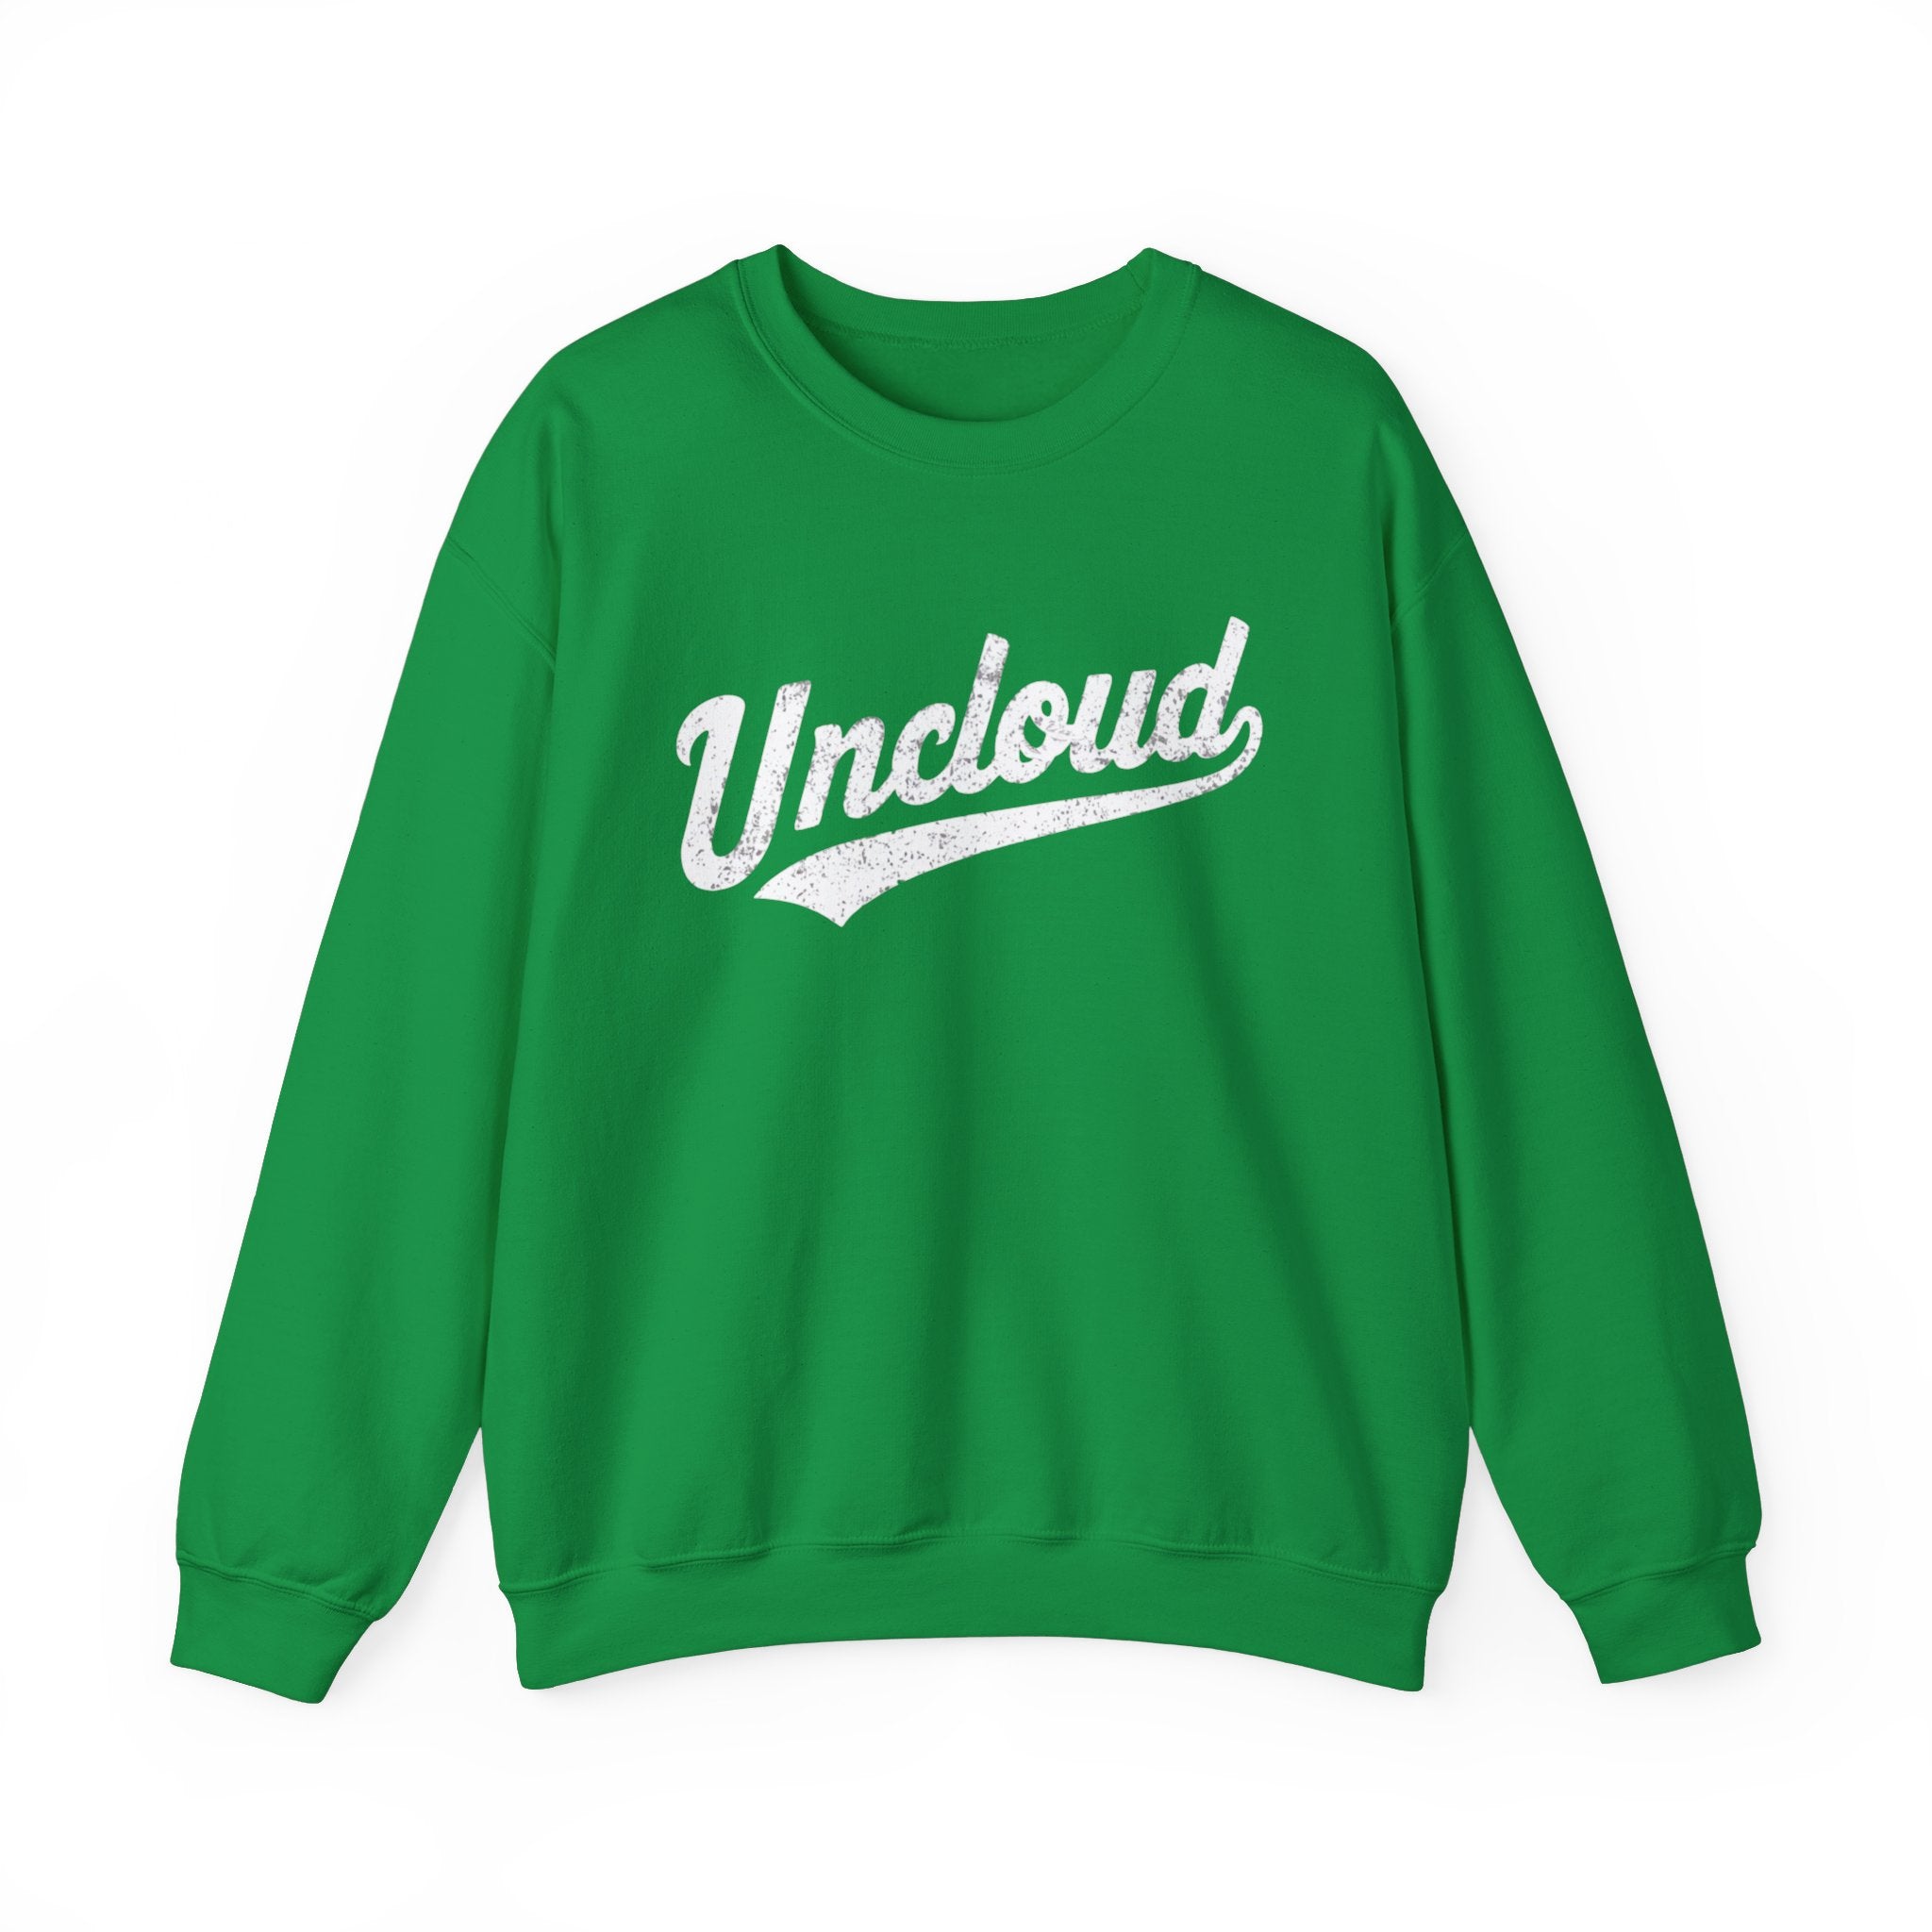 A cozy and warm green Uncloud - Sweatshirt, perfect for the colder months, featuring the word "Uncloud" in a white, distressed script font across the chest.